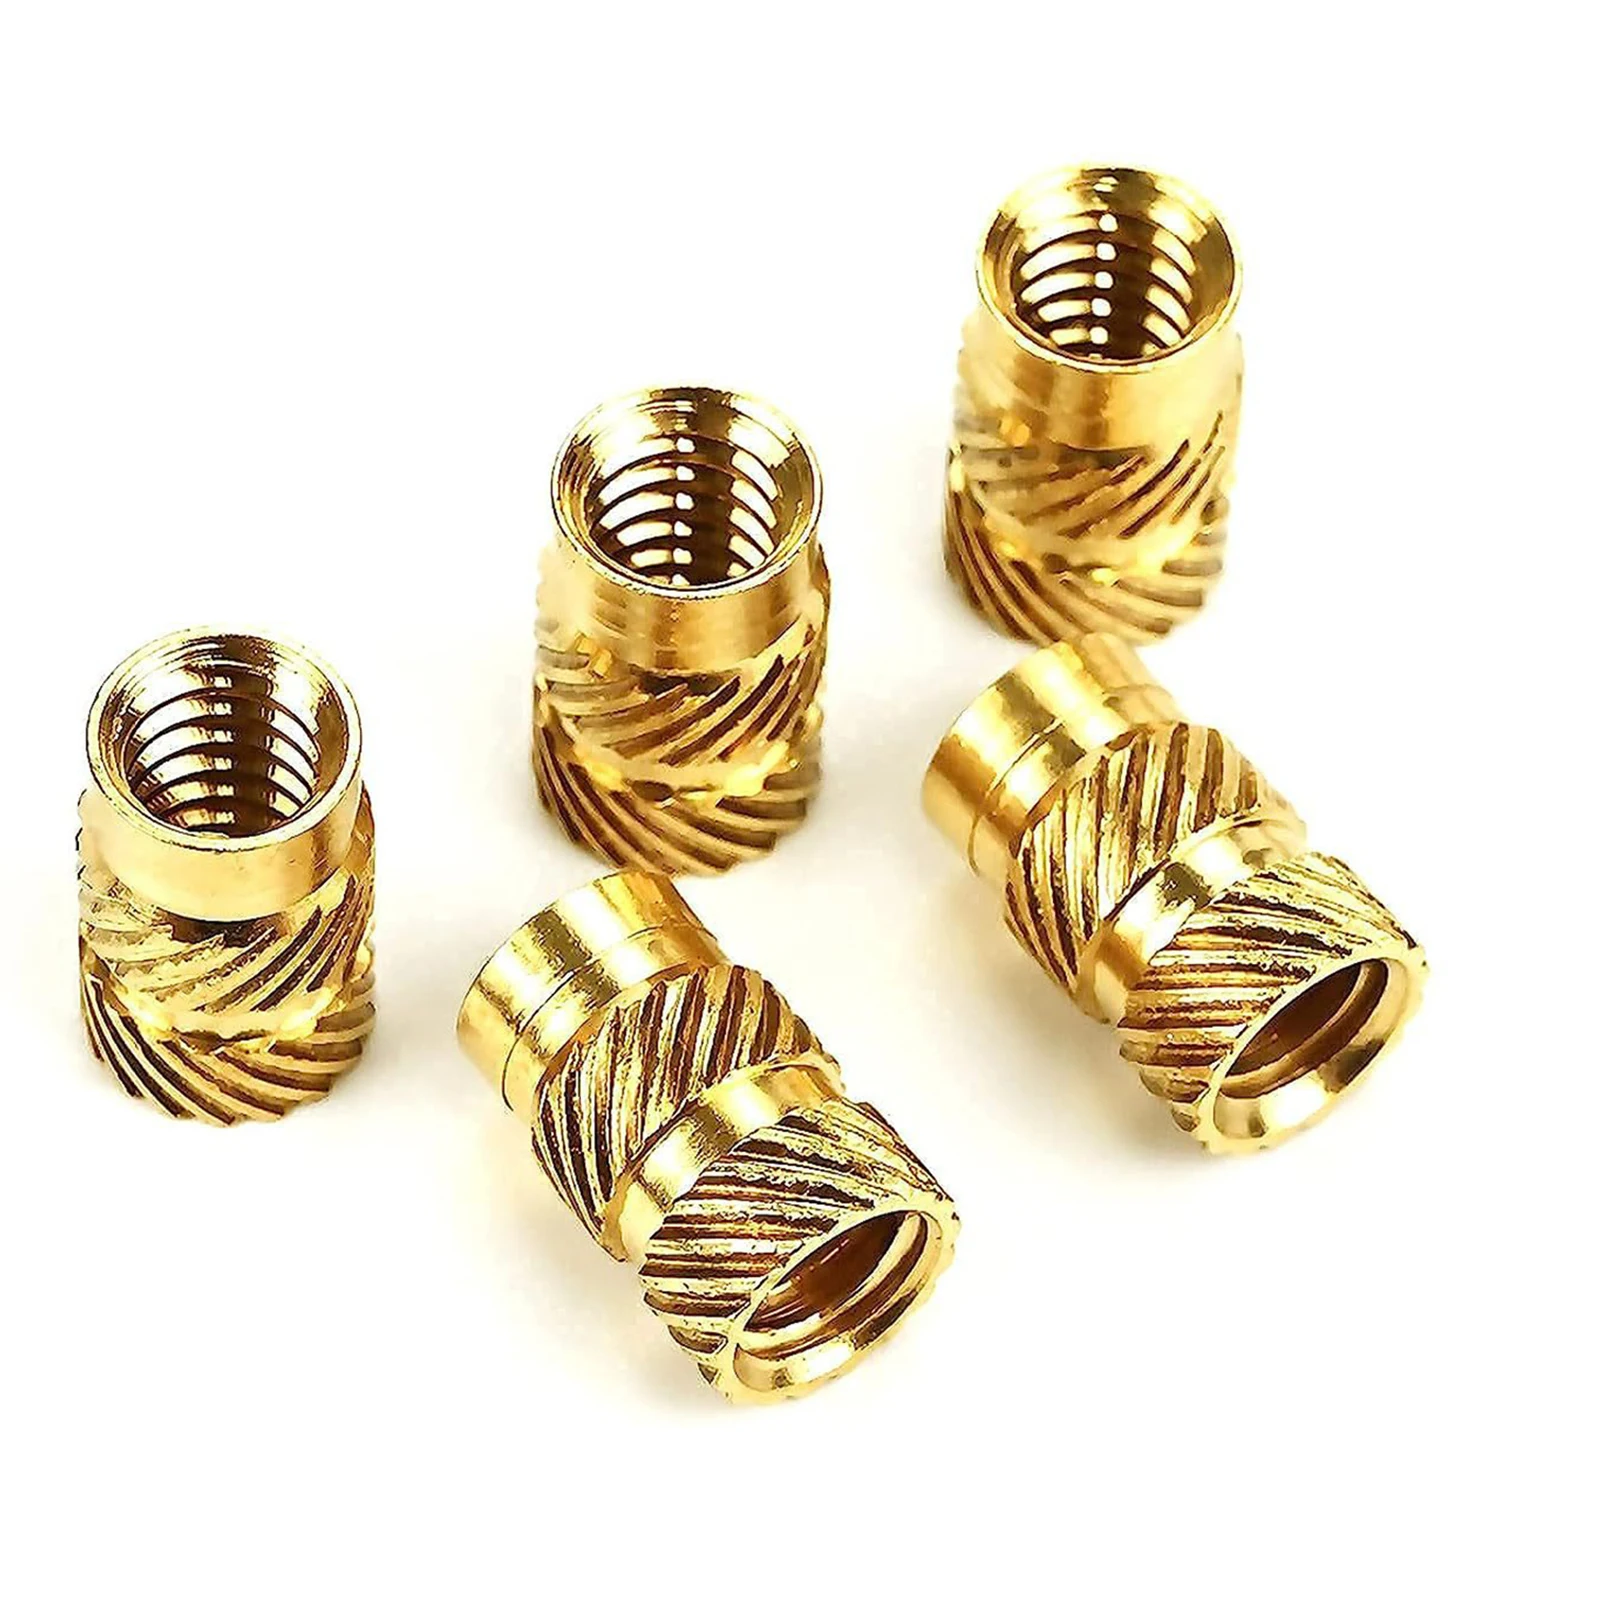 

300PCS Brass Threaded Insert Knurled Nuts Heat Molding Thread Embedment Nuts Assortment Kit for 3D Printing Injection Molding